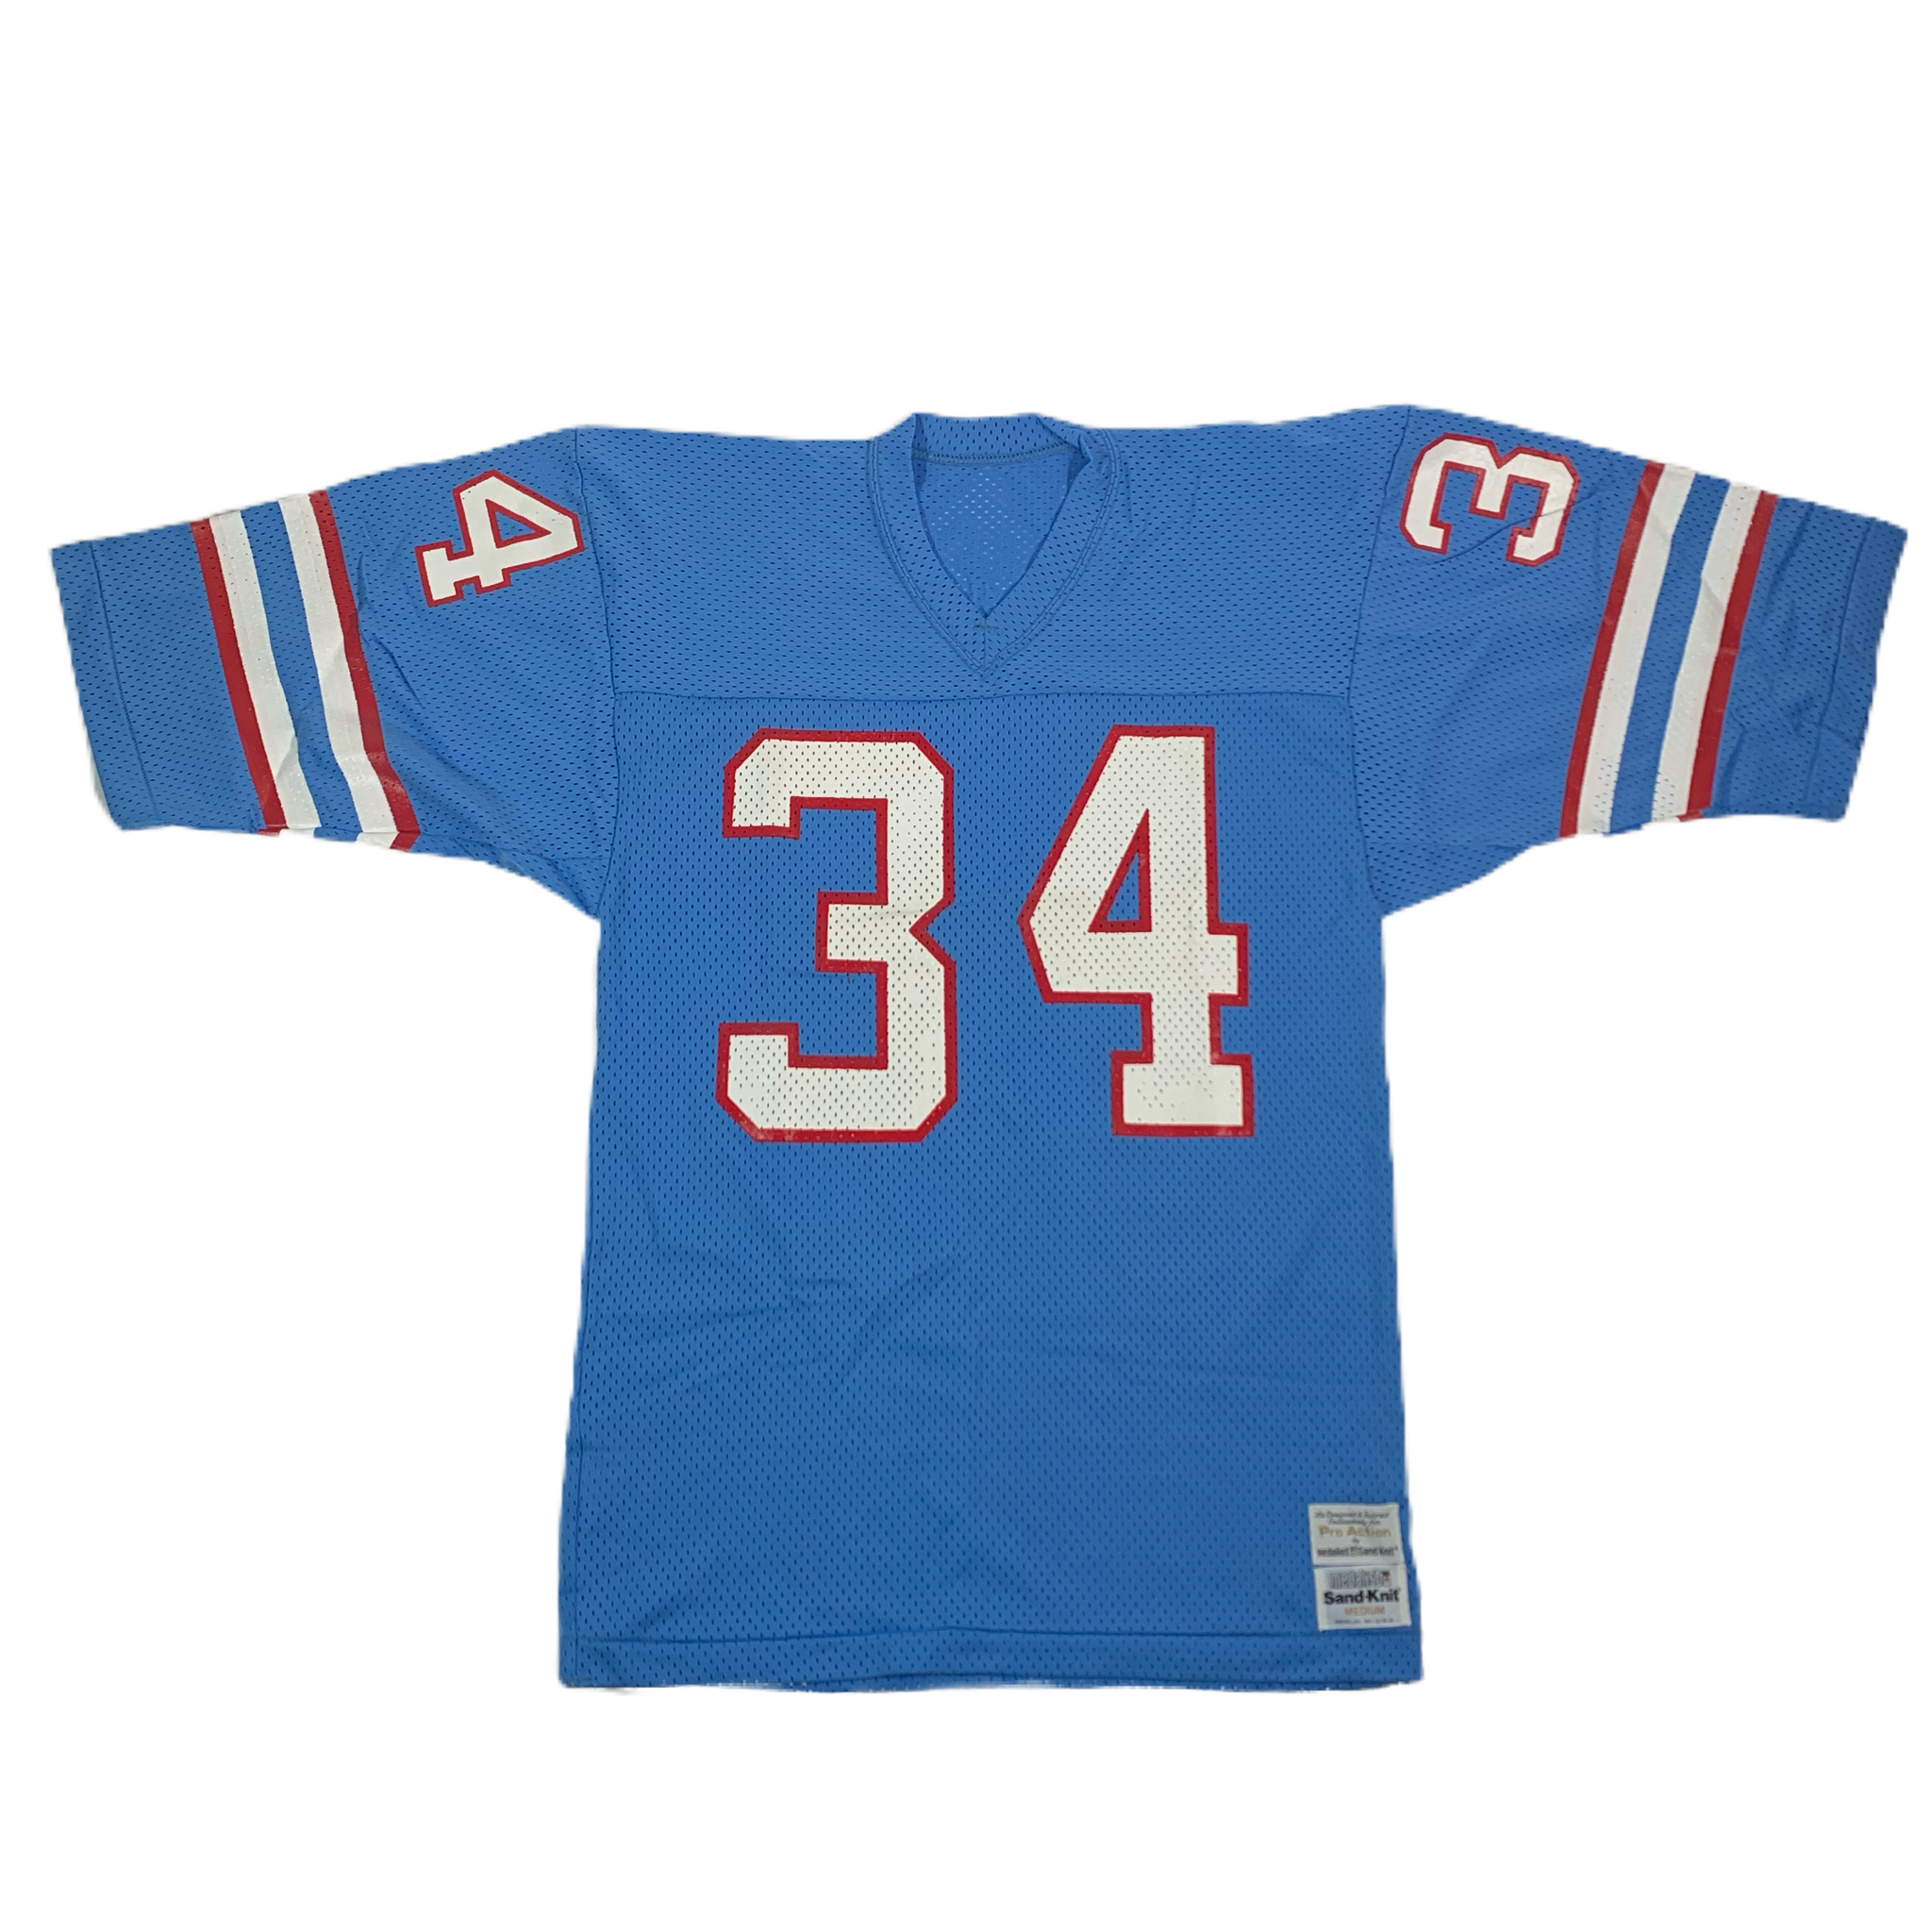 Outerwear - Houston Oilers Throwback Apparel & Jerseys